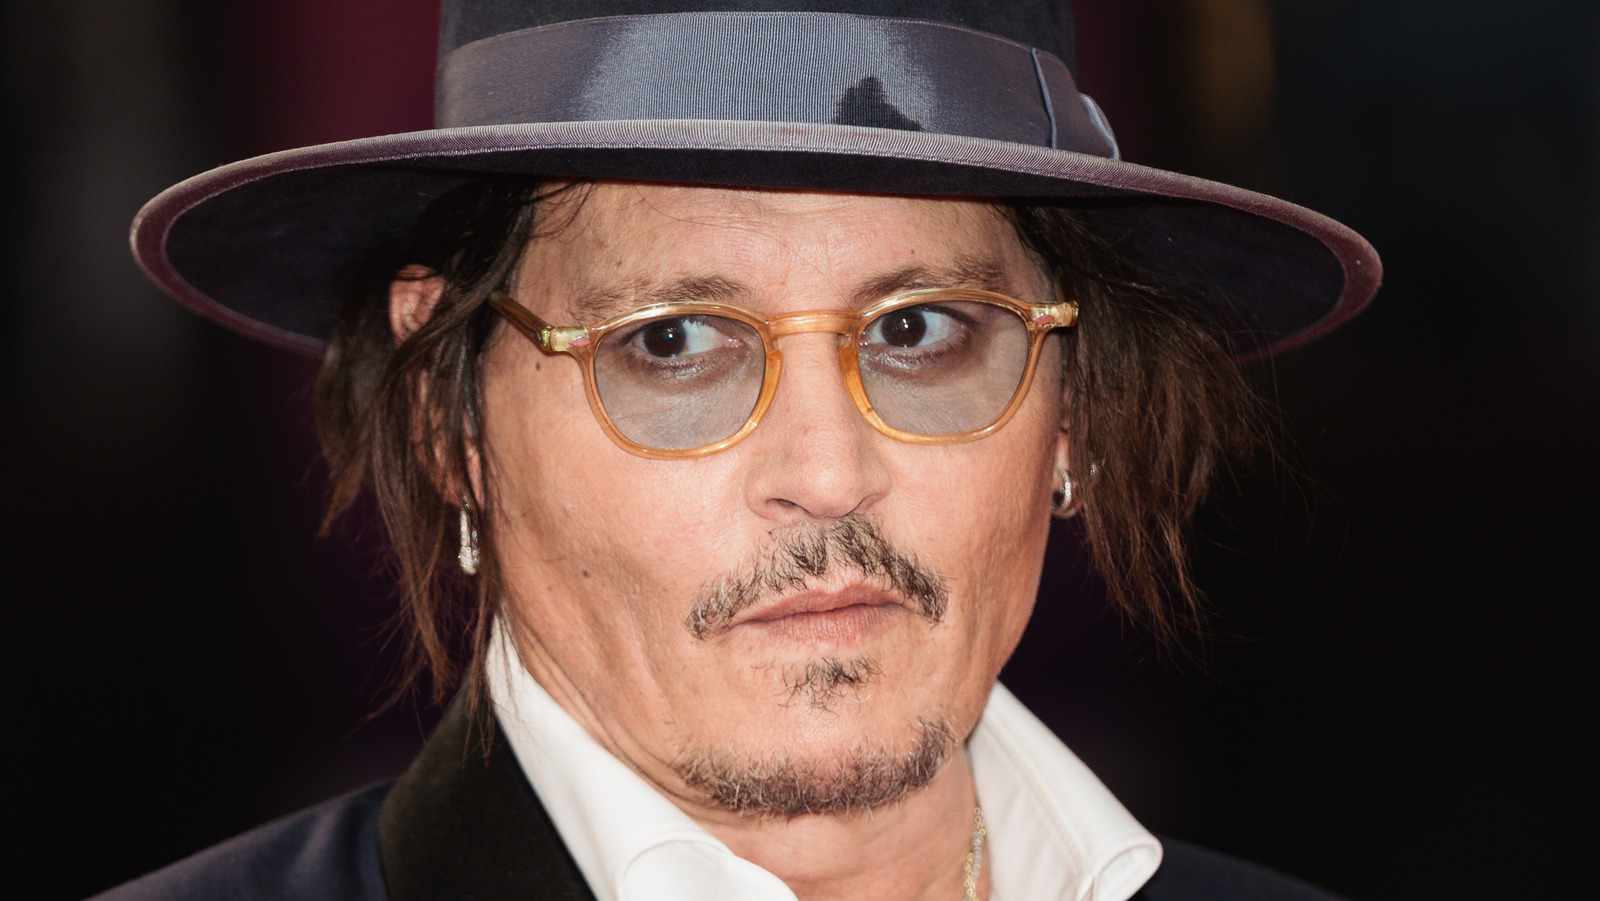 Here's What Johnny Depp Is Really Drinking On Screen